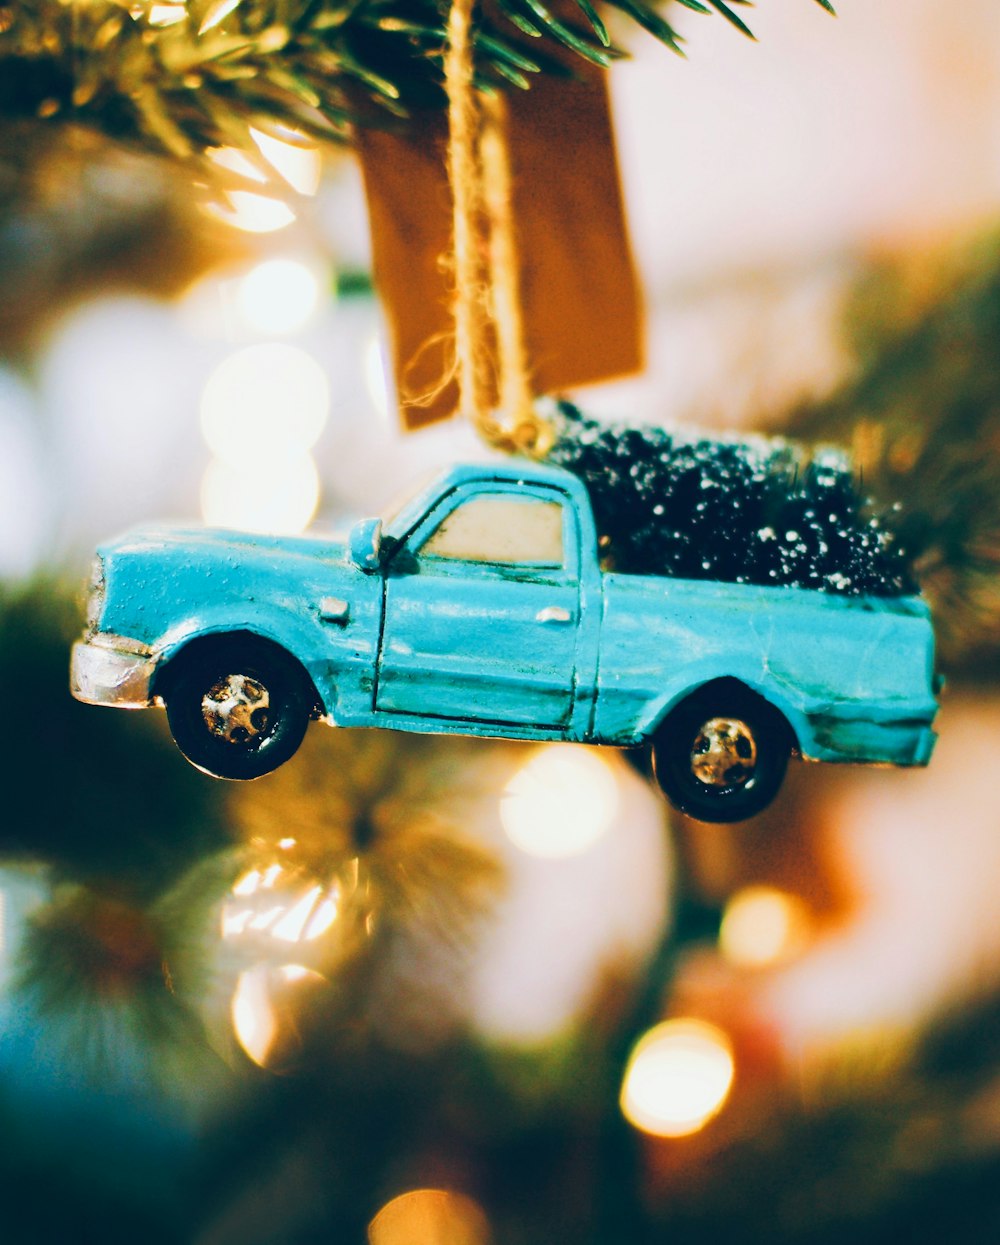 a toy car on a tree